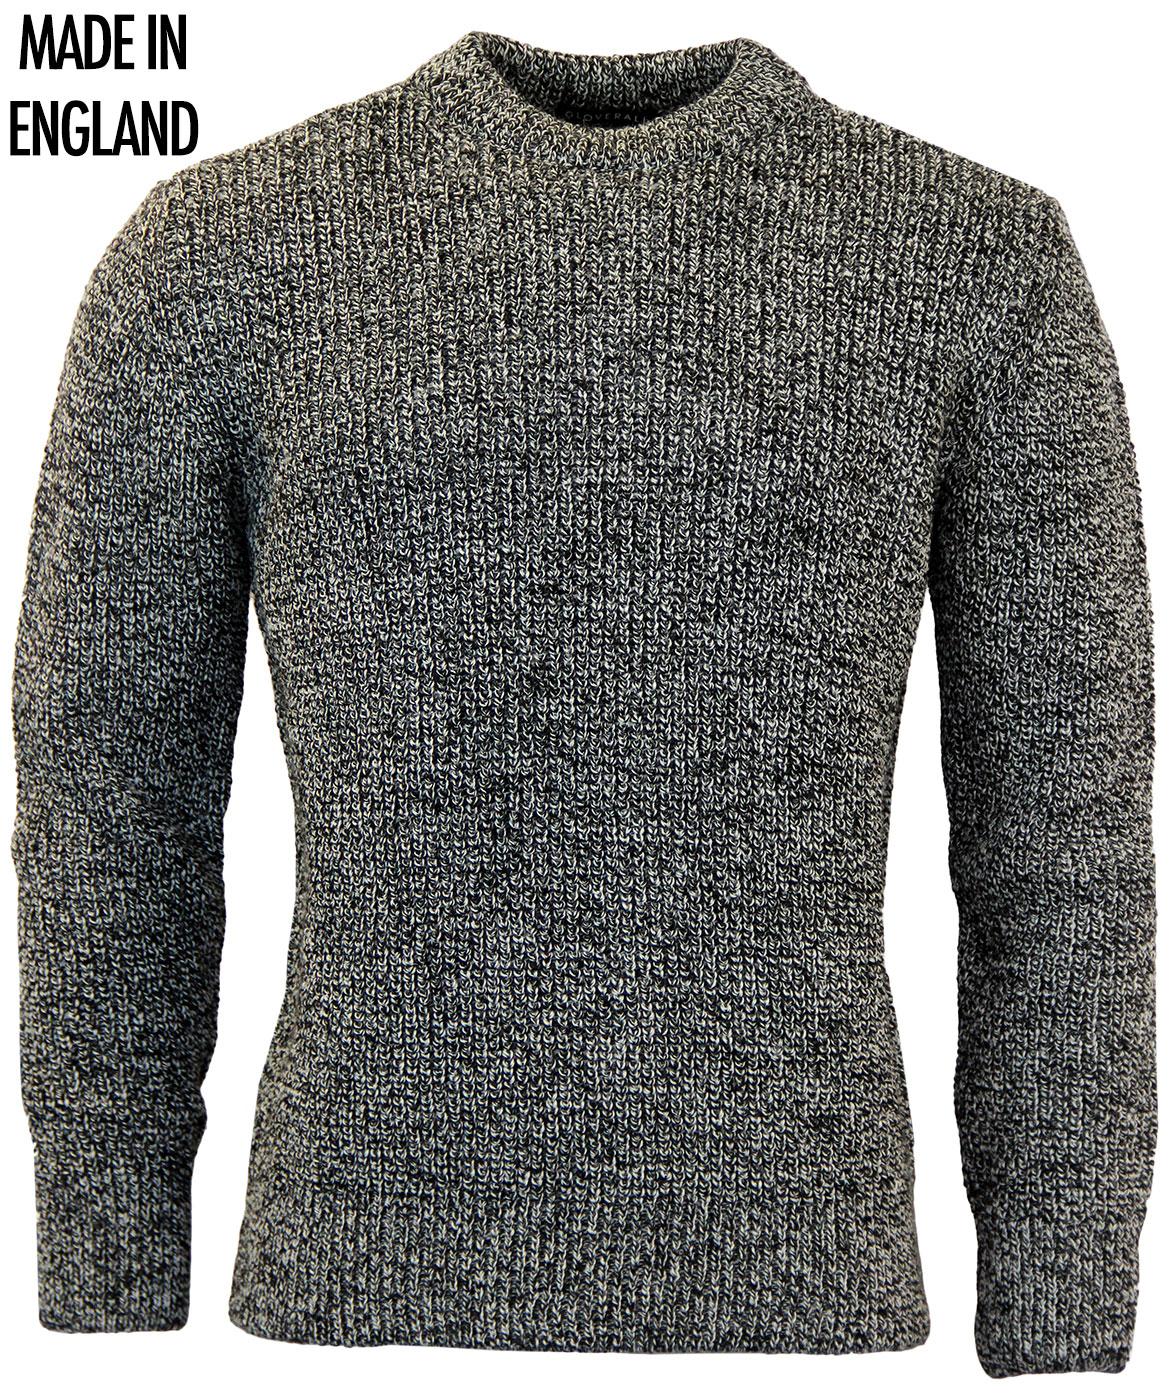 GLOVERALL Retro Chunky Knit Wool Jumper